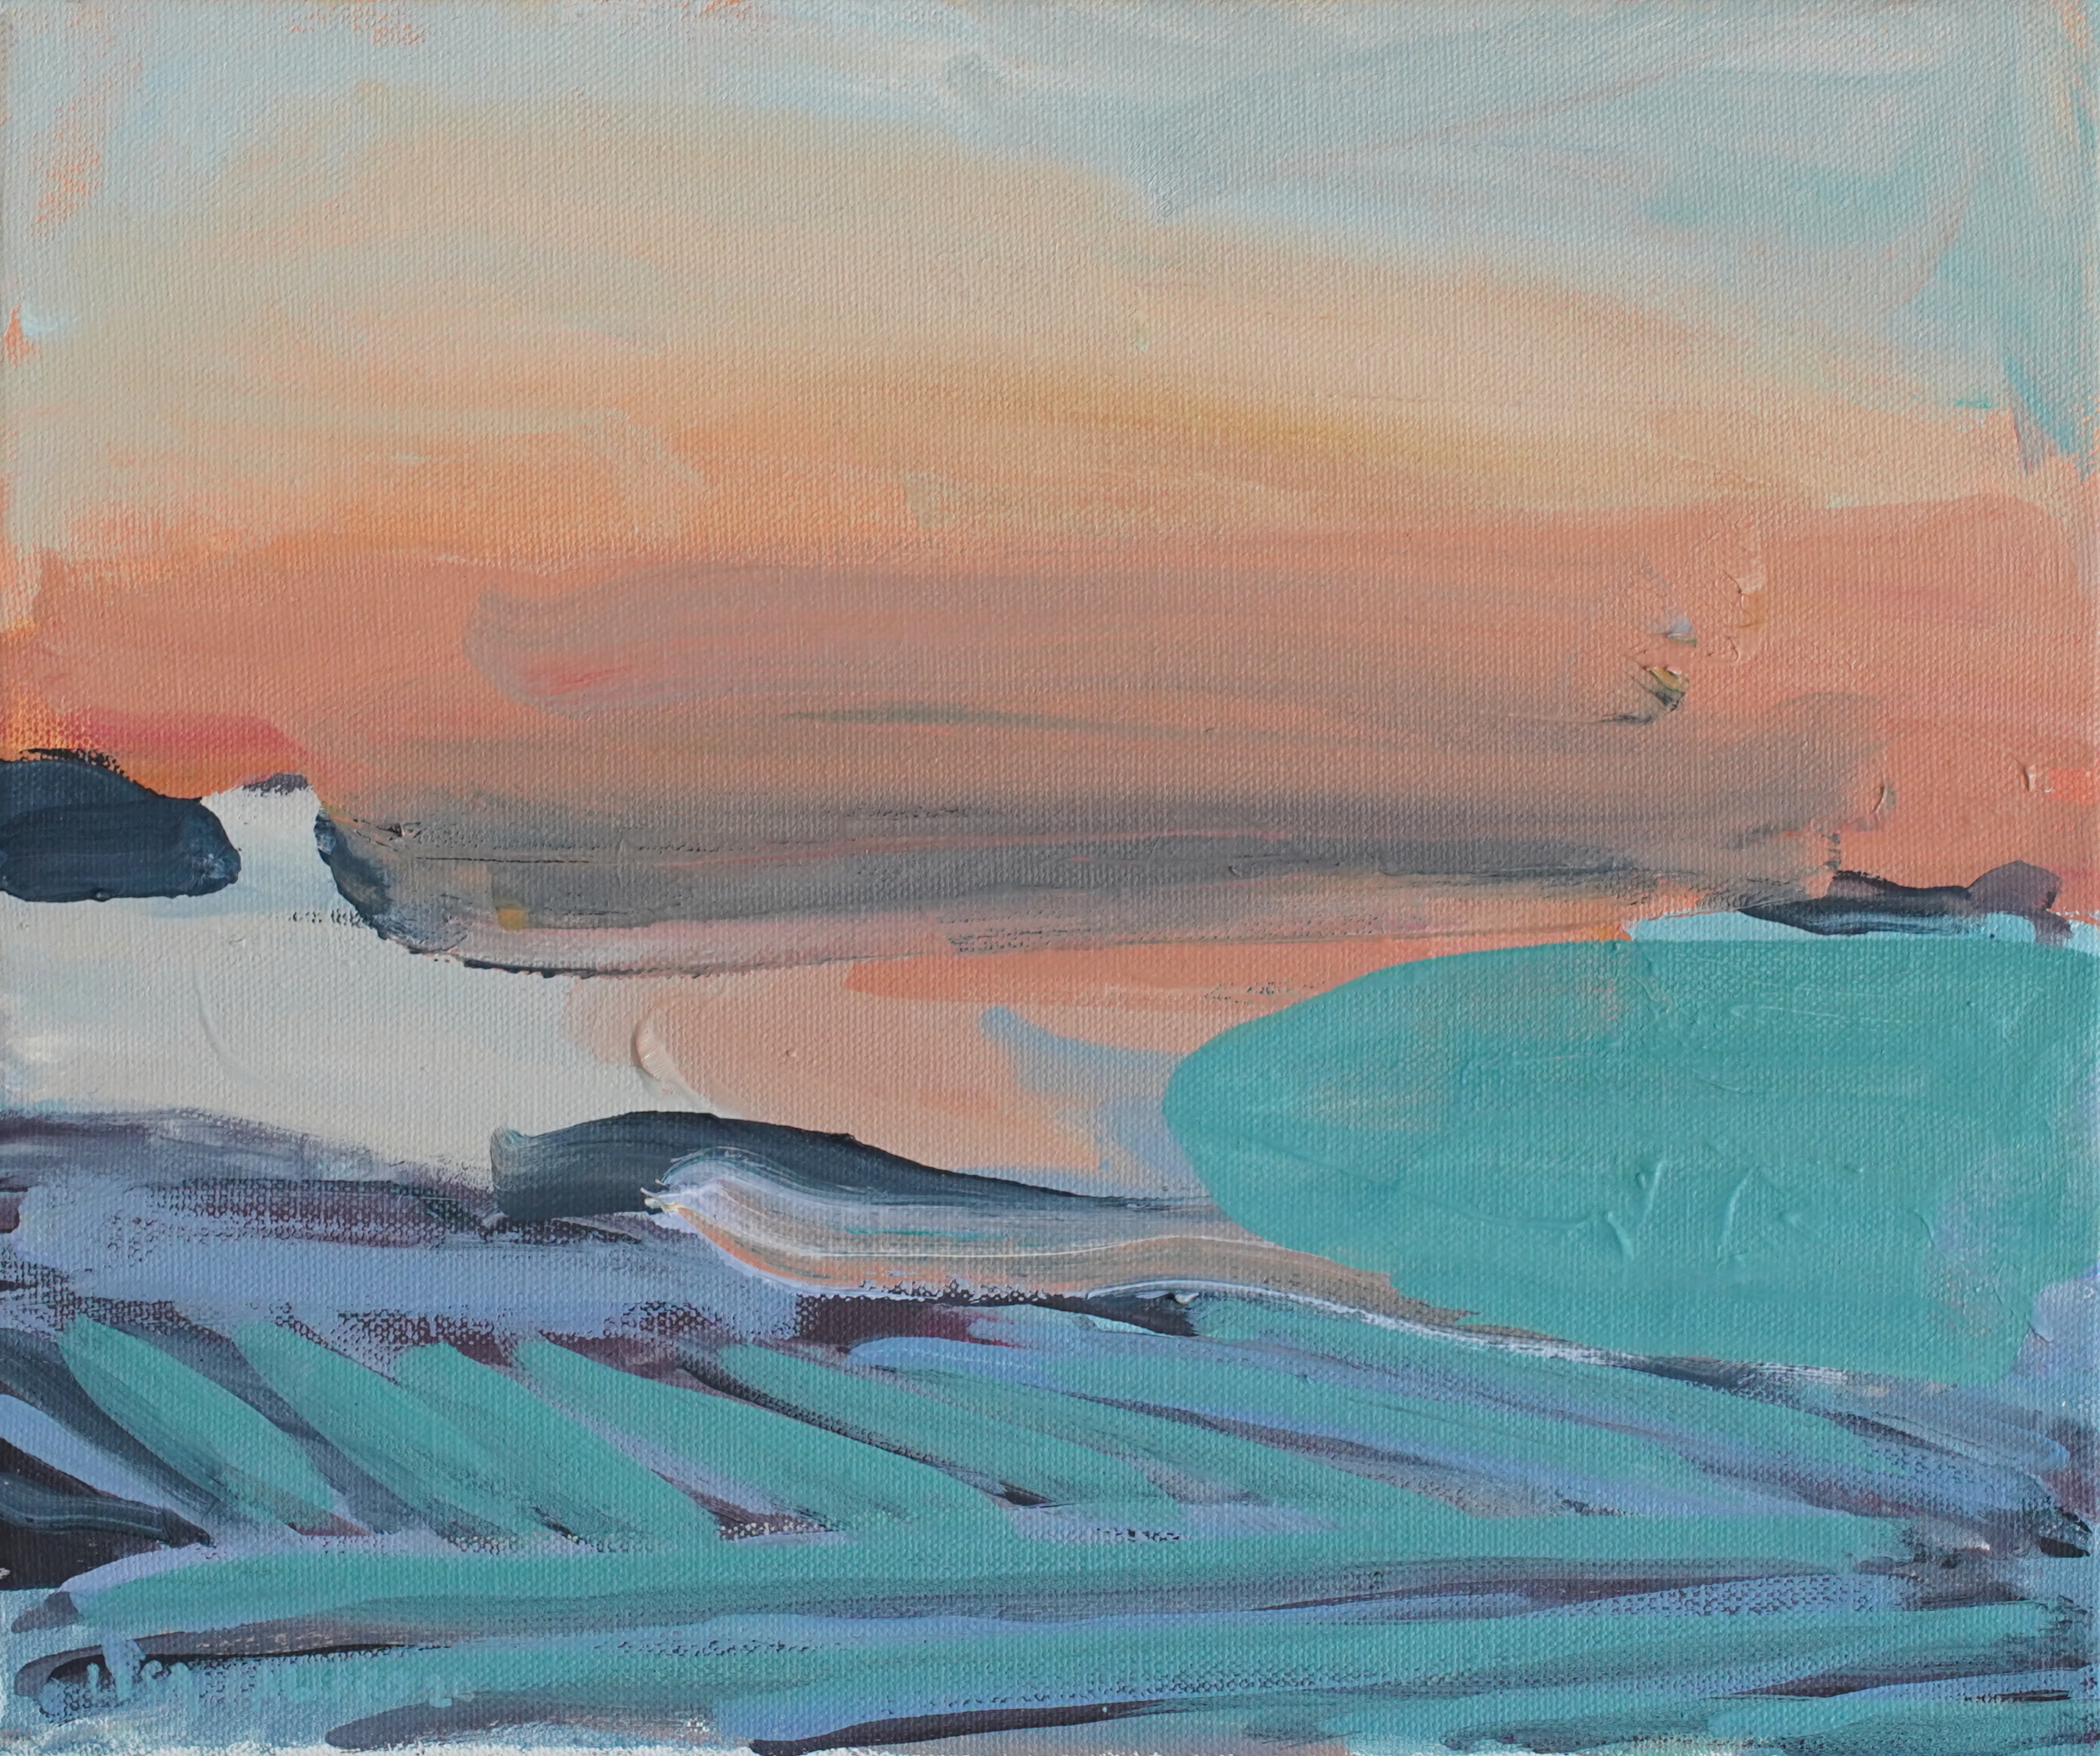 'Fields in Sunset', oil and spray paint on canvas, 25cm x 30cm, £670